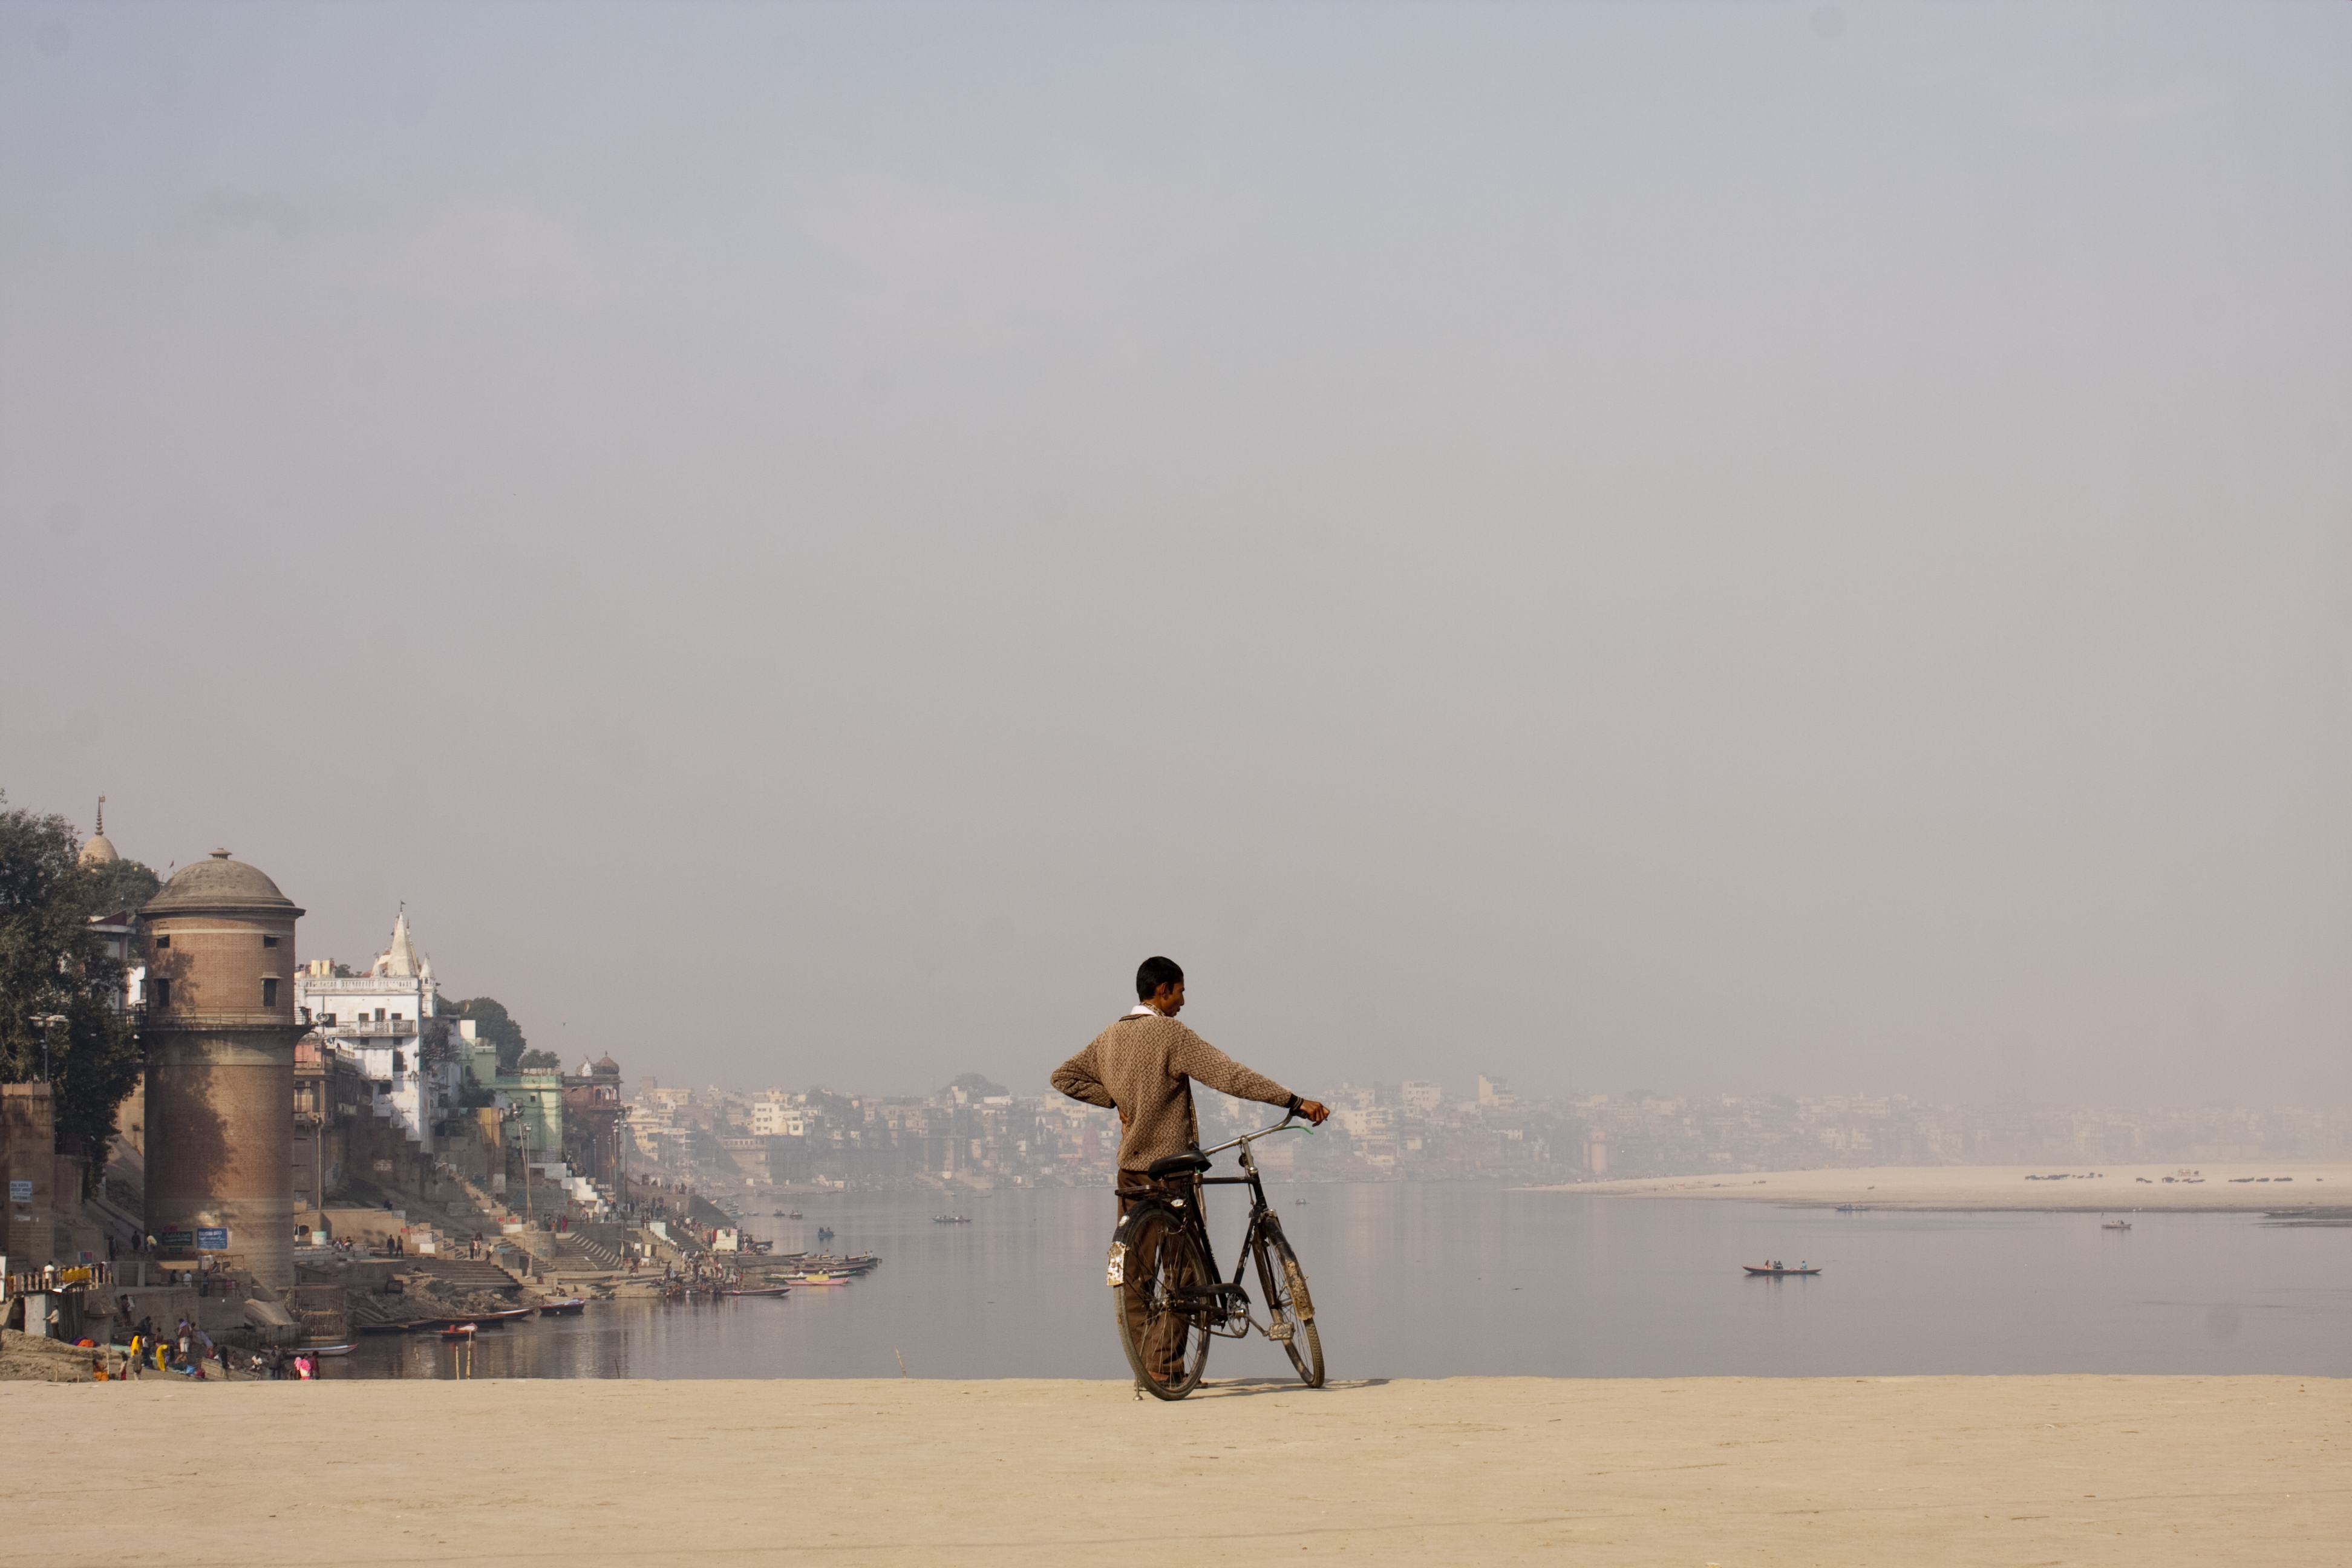 A man standing with this bicycle, Bicycle, City, Human, India, HQ Photo